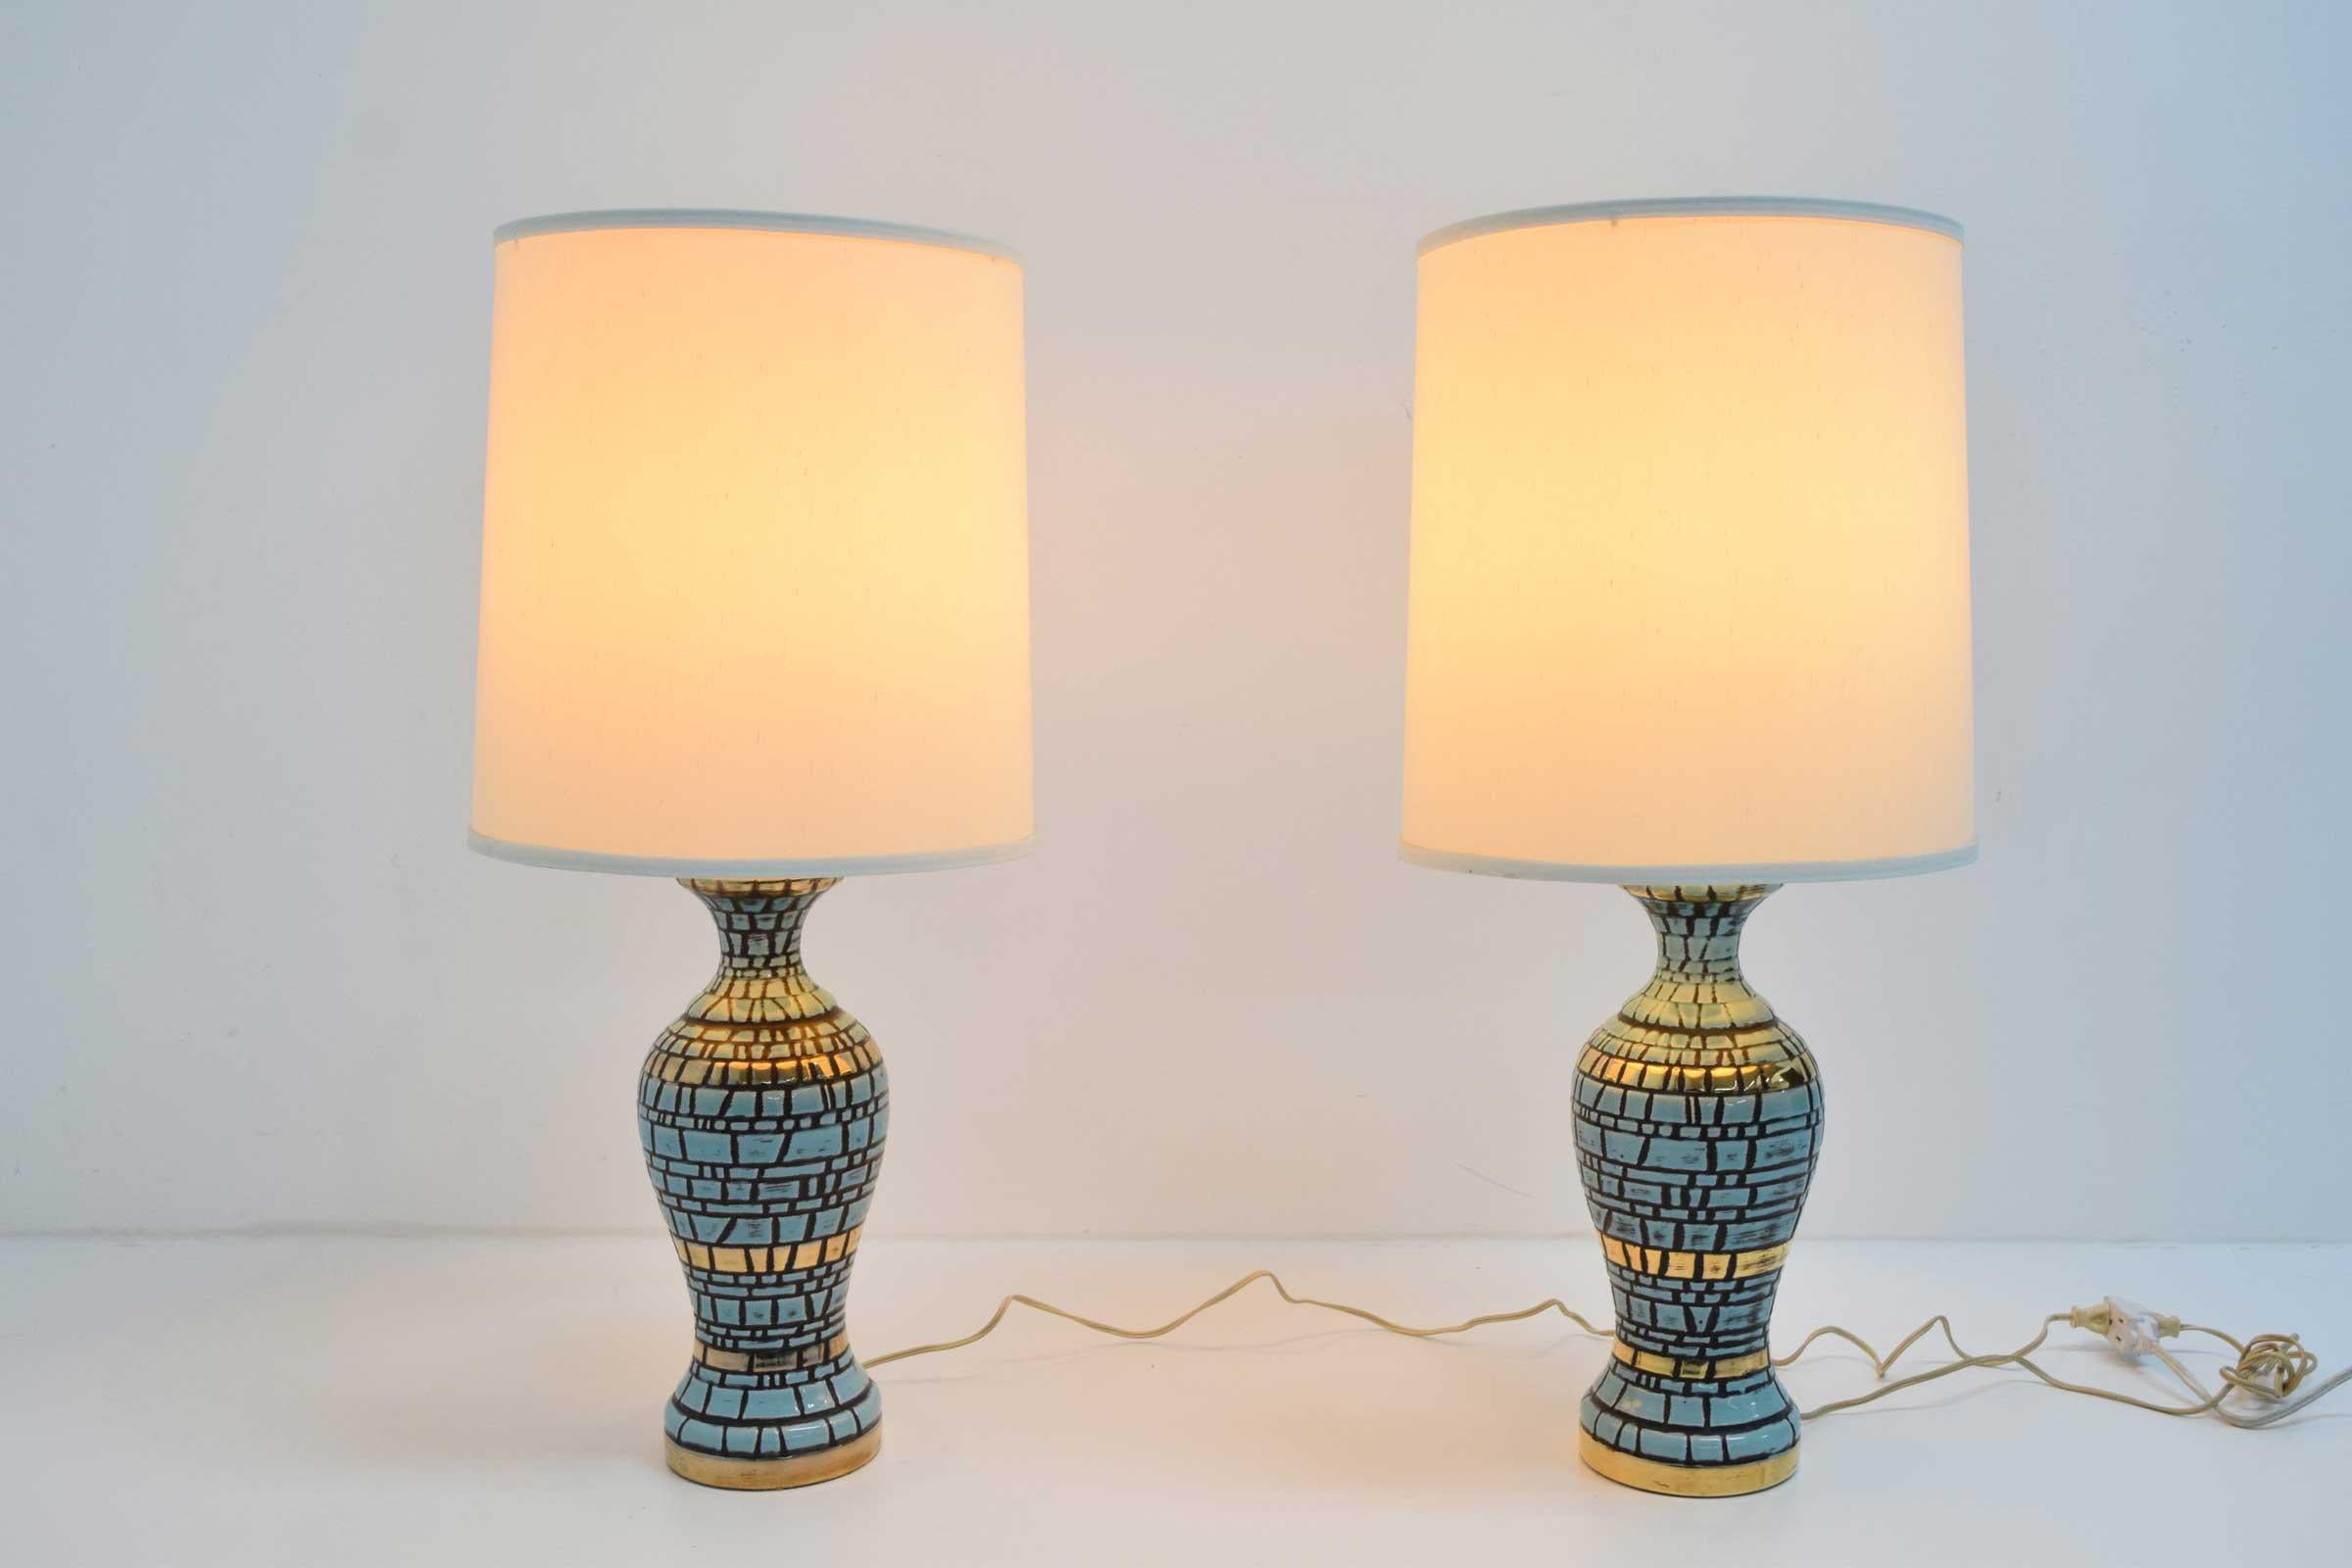 20th Century Midcentury Ceramic Tiled Lamps in Turquoise and Gold